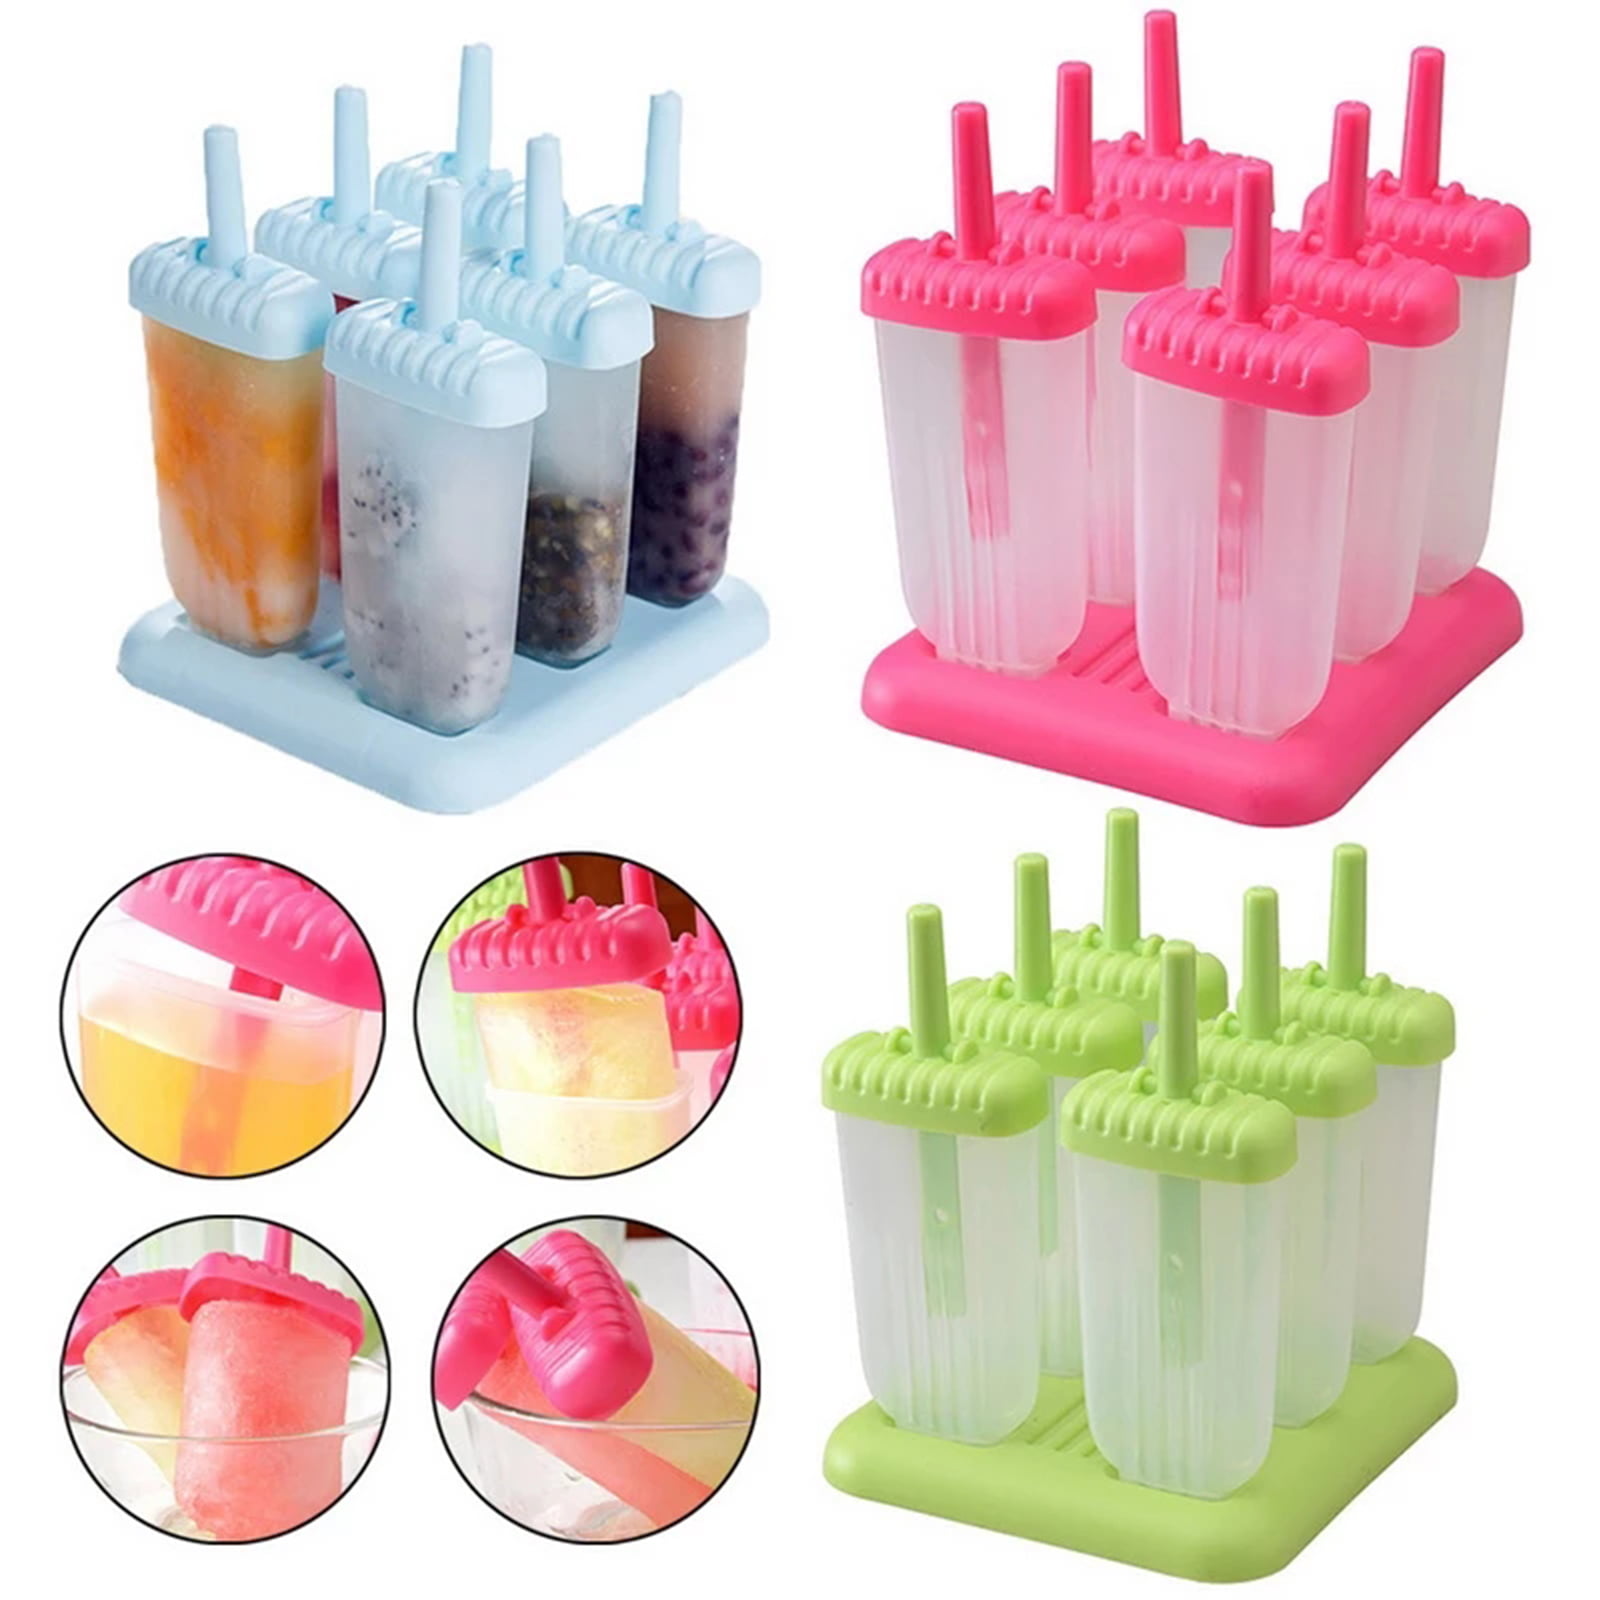 Molds Set Ice Cream Reusable Silicone DIY Popsicle Moulds for Kids,Toddlers and Adults Ice Lolly Makers Ice Lolly Moulds Blue, Small 